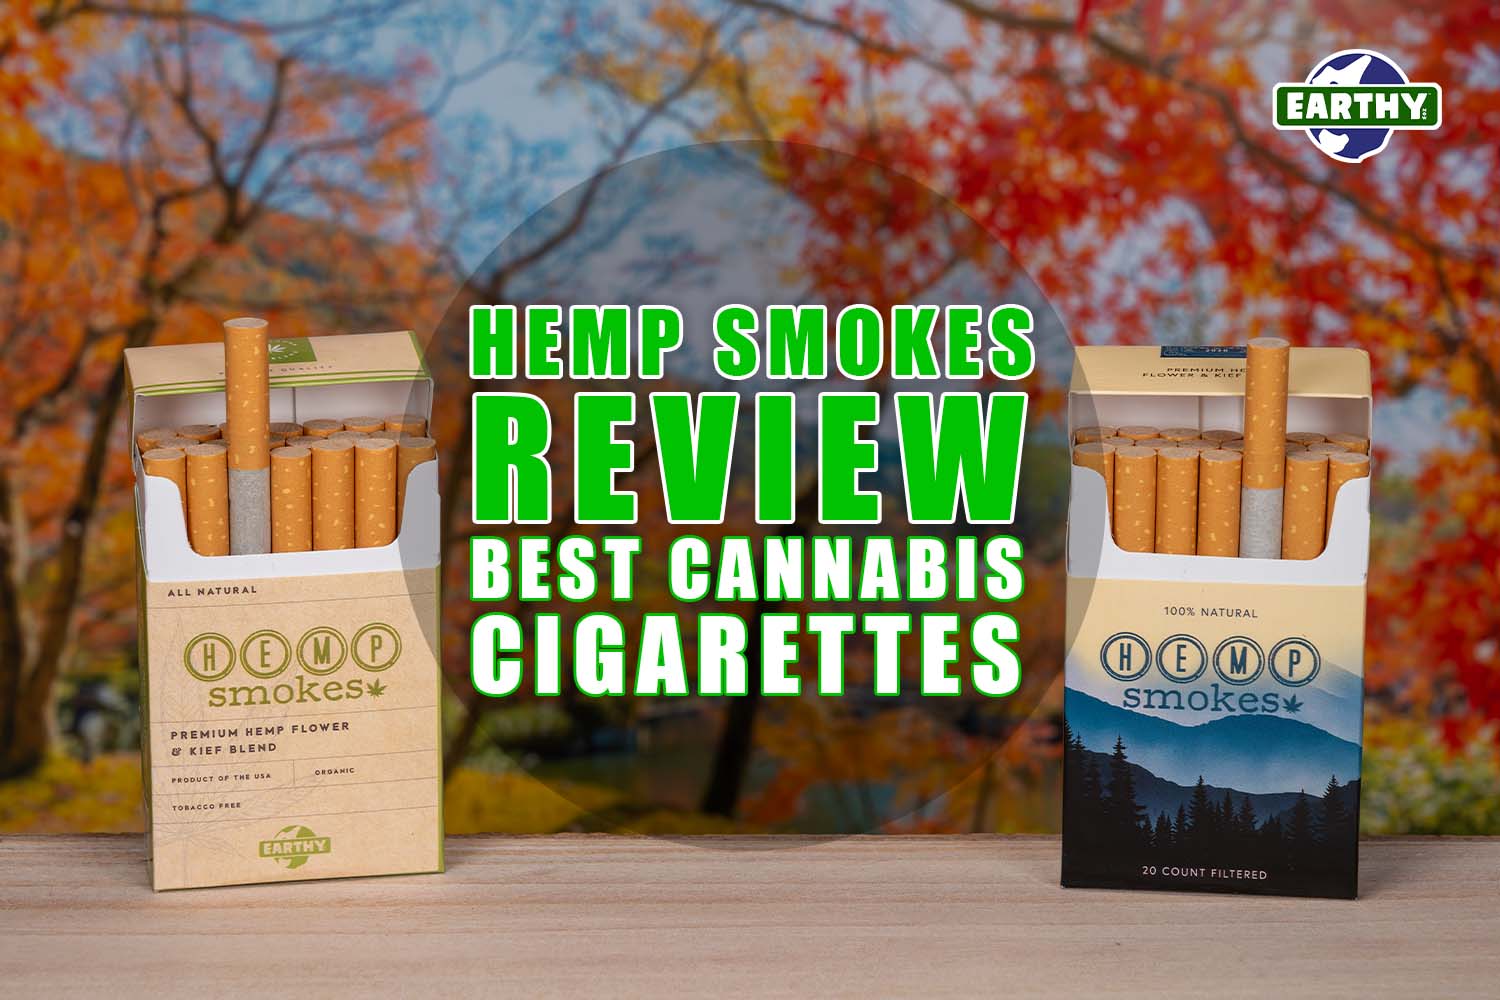 Hemp Smokes Review: Best Cannabis Cigarettes | Earthy Now